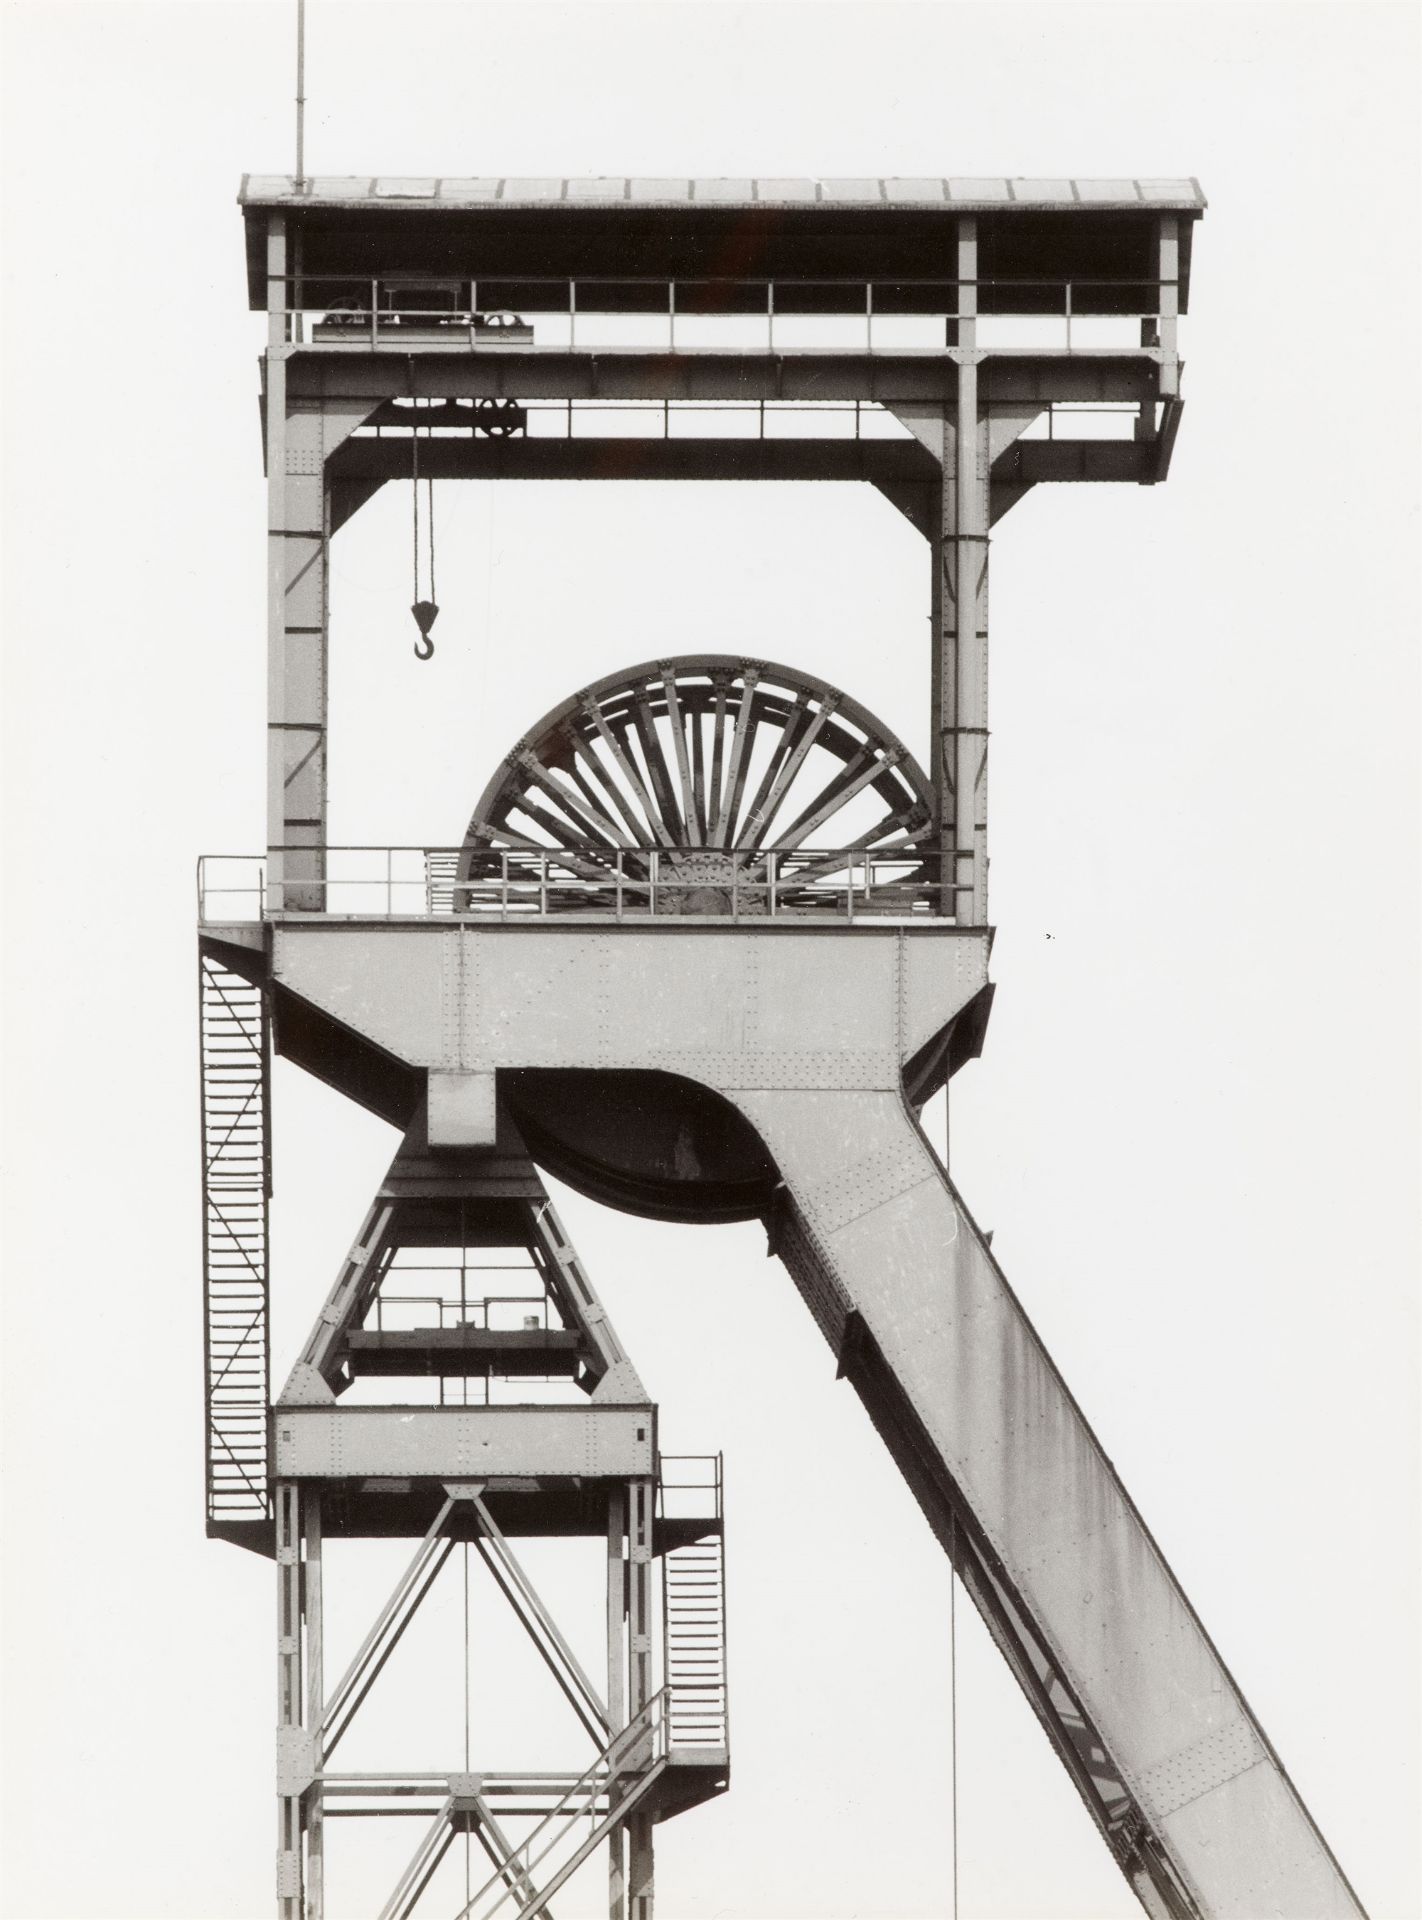 Bernd and Hilla Becher, Winding towers - Image 10 of 14